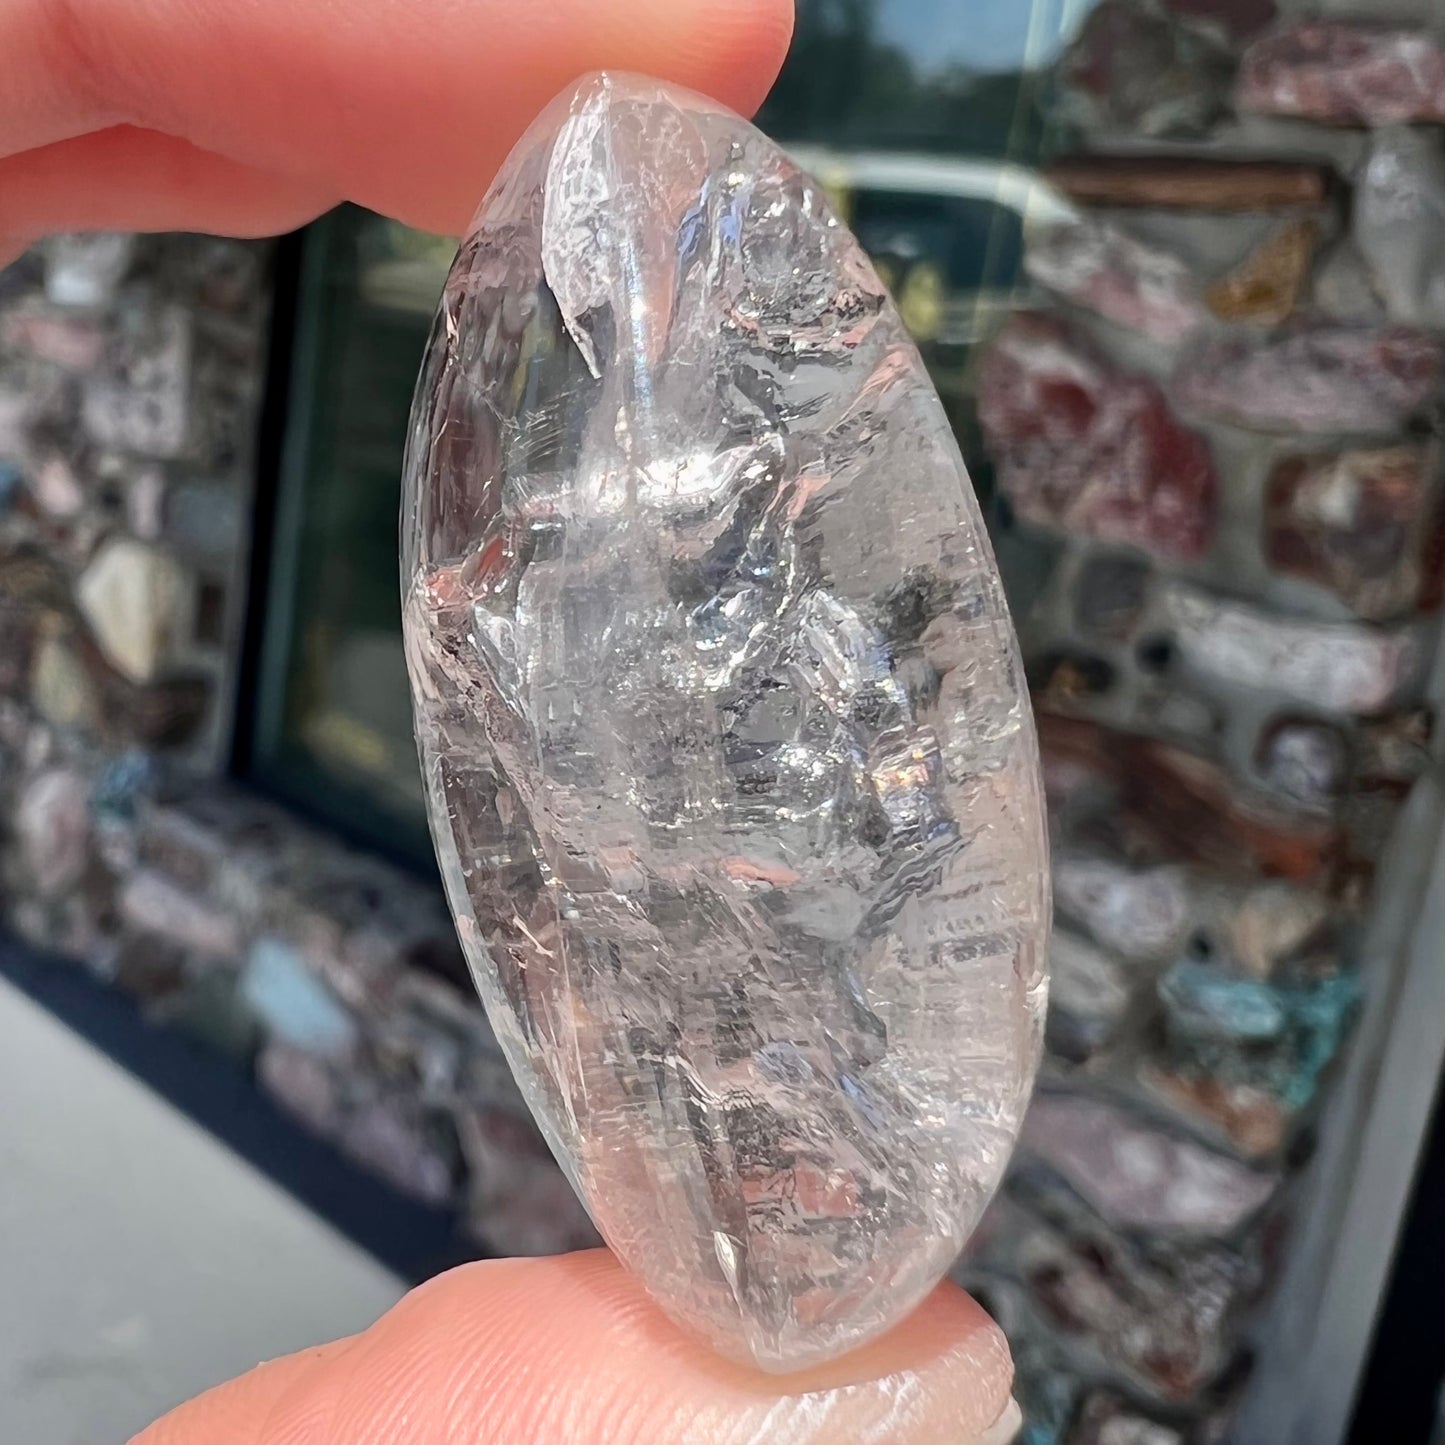 A polished clear quartz with two liquid enhydro inclusions around a solid phantom crystal inclusion.